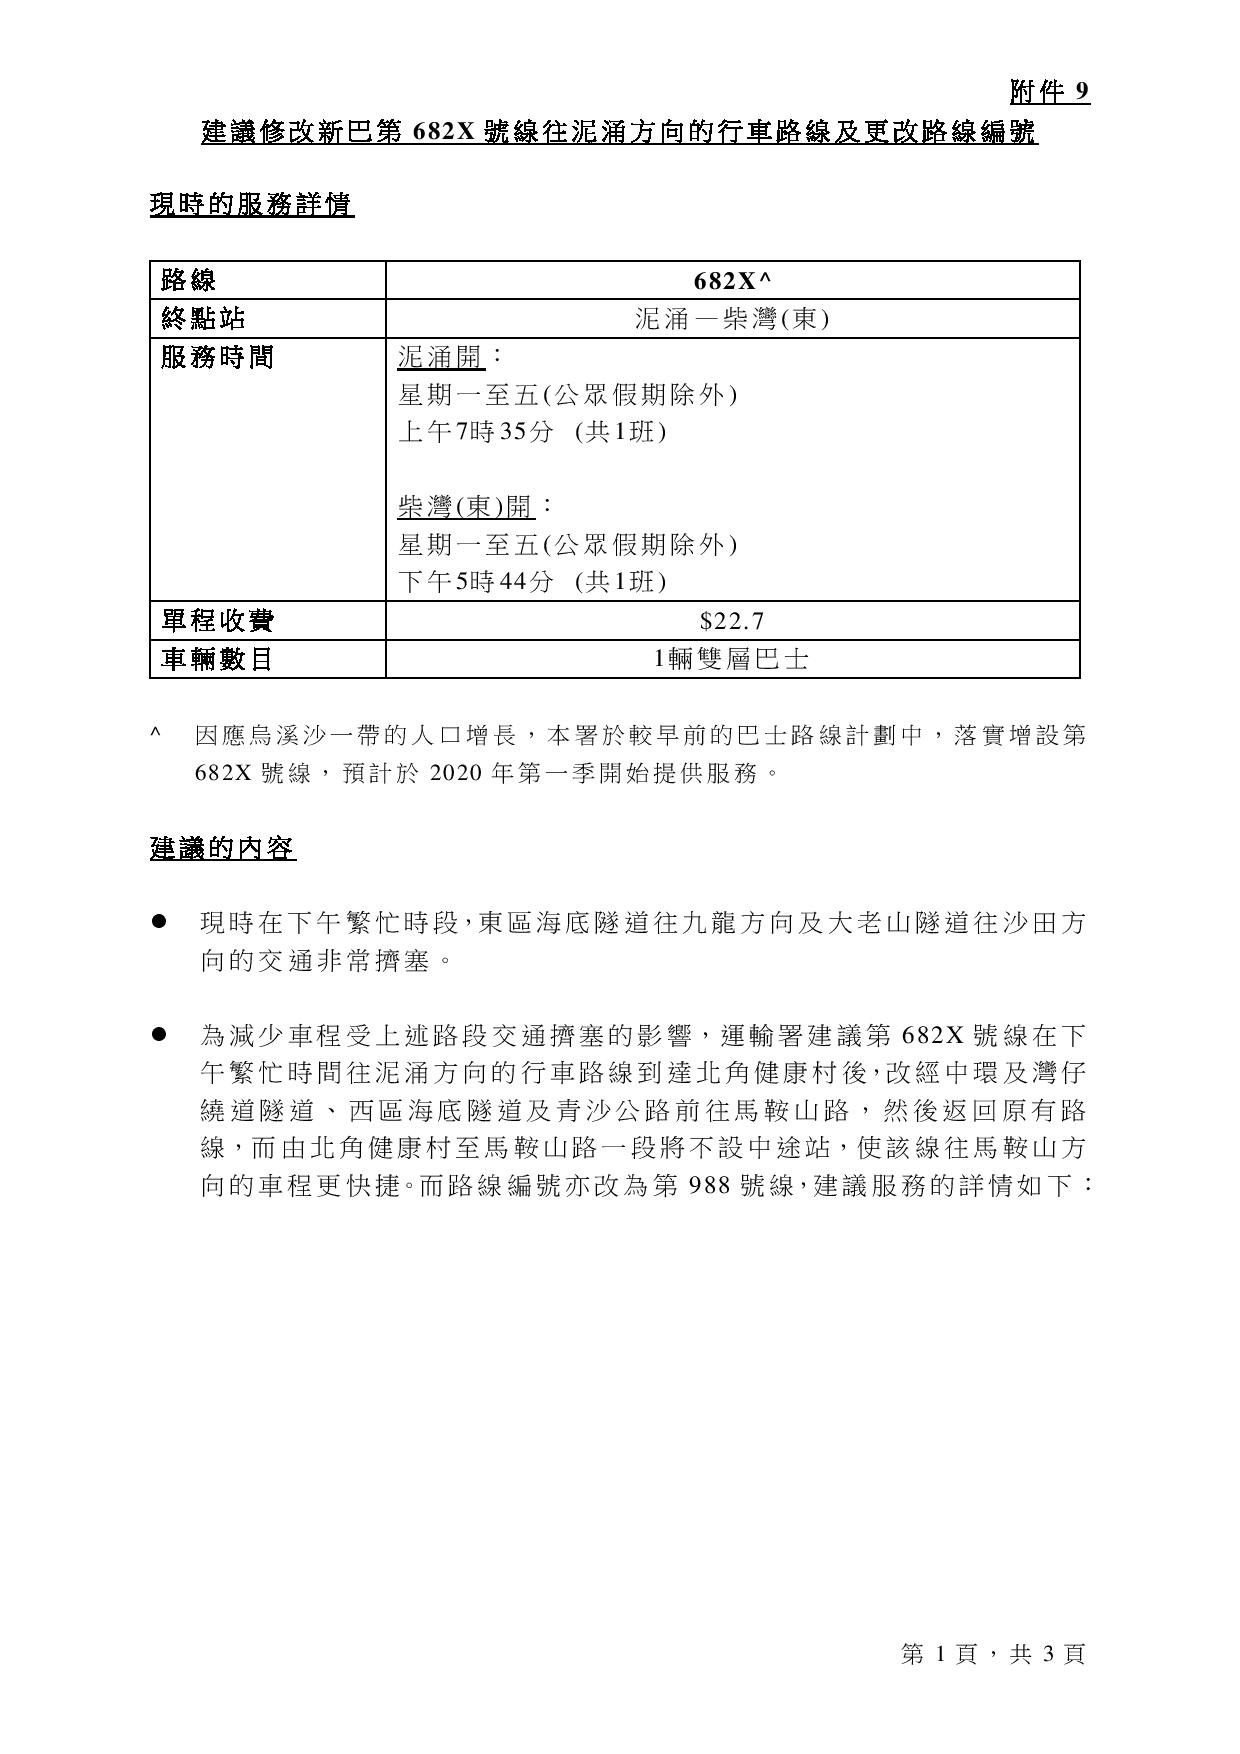 Document-page-036.jpg